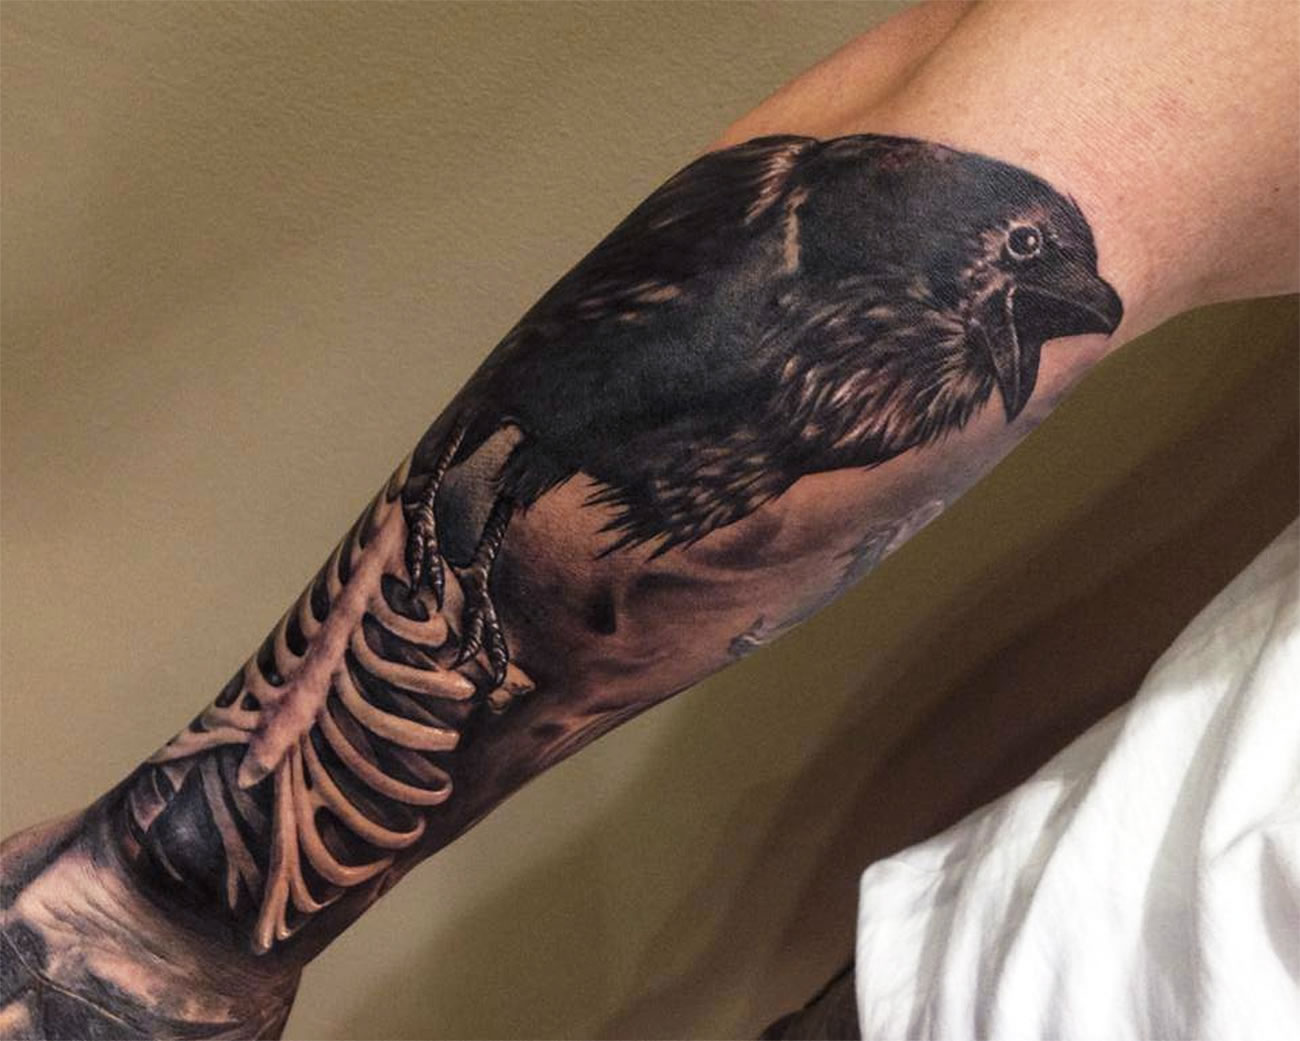 Awesome Crow Sit On Rib Cage Tattoo On Forearm